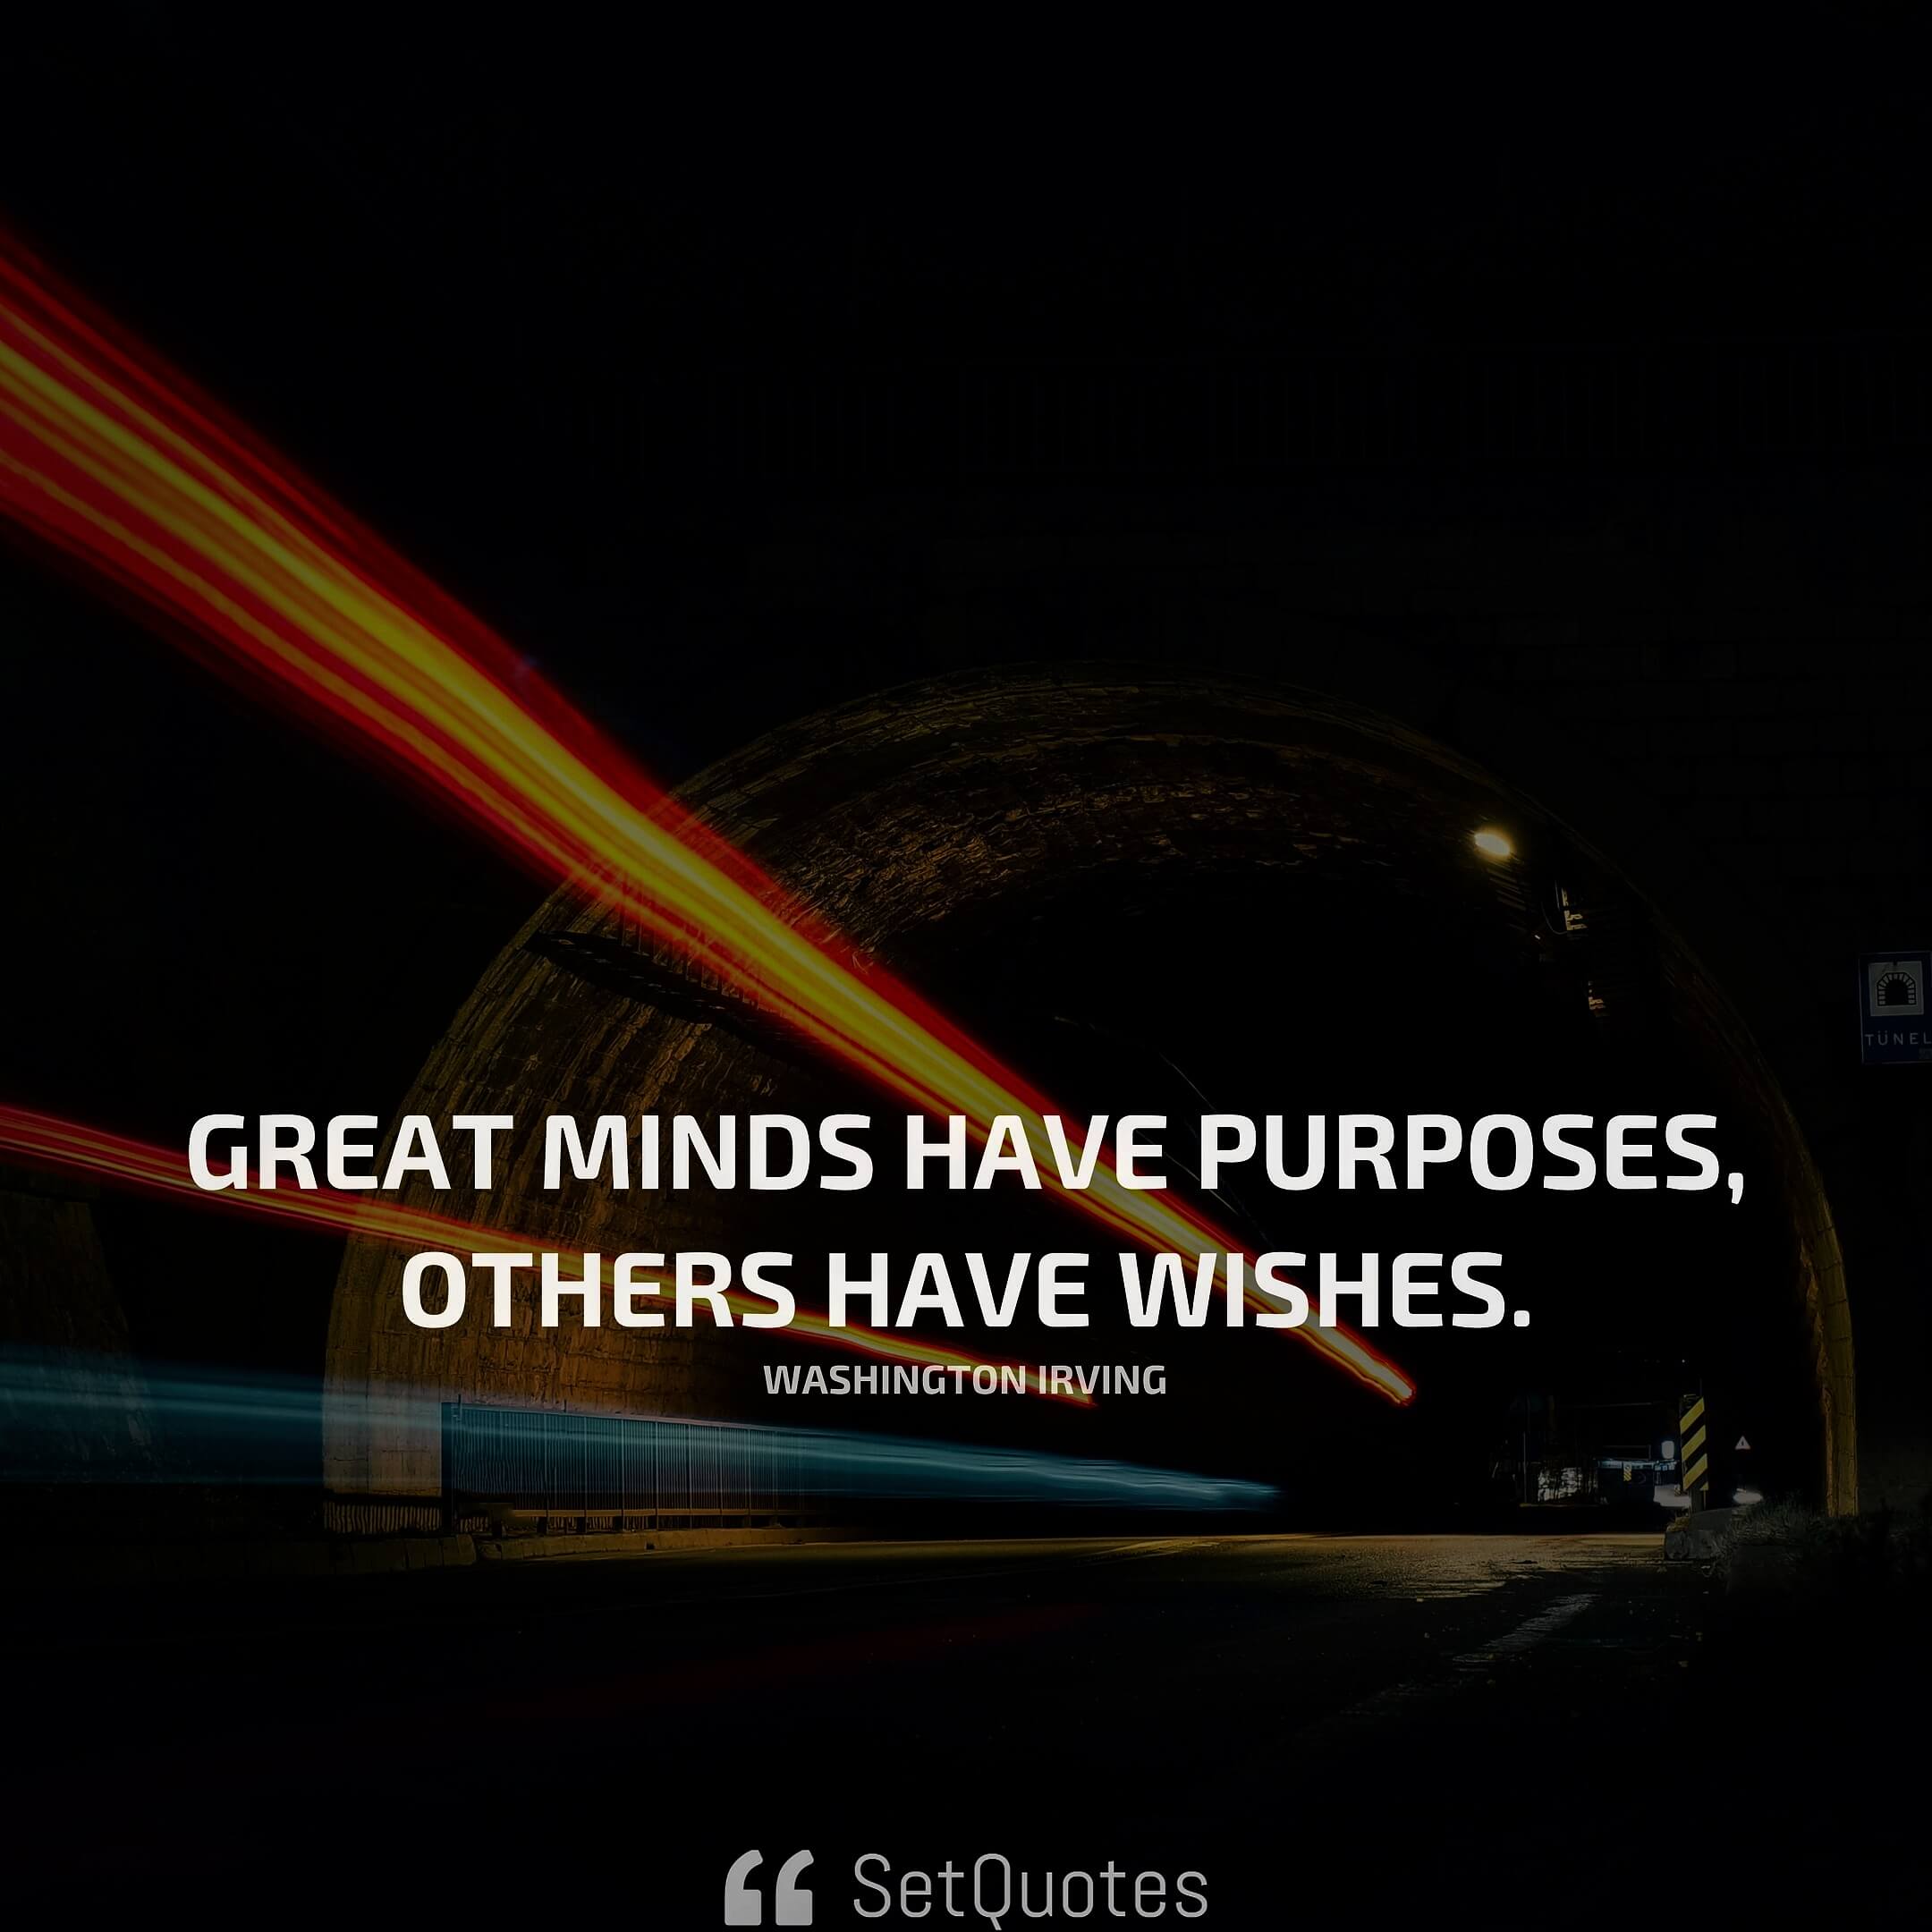 Great minds have purposes, others have wishes. – Washington Irving